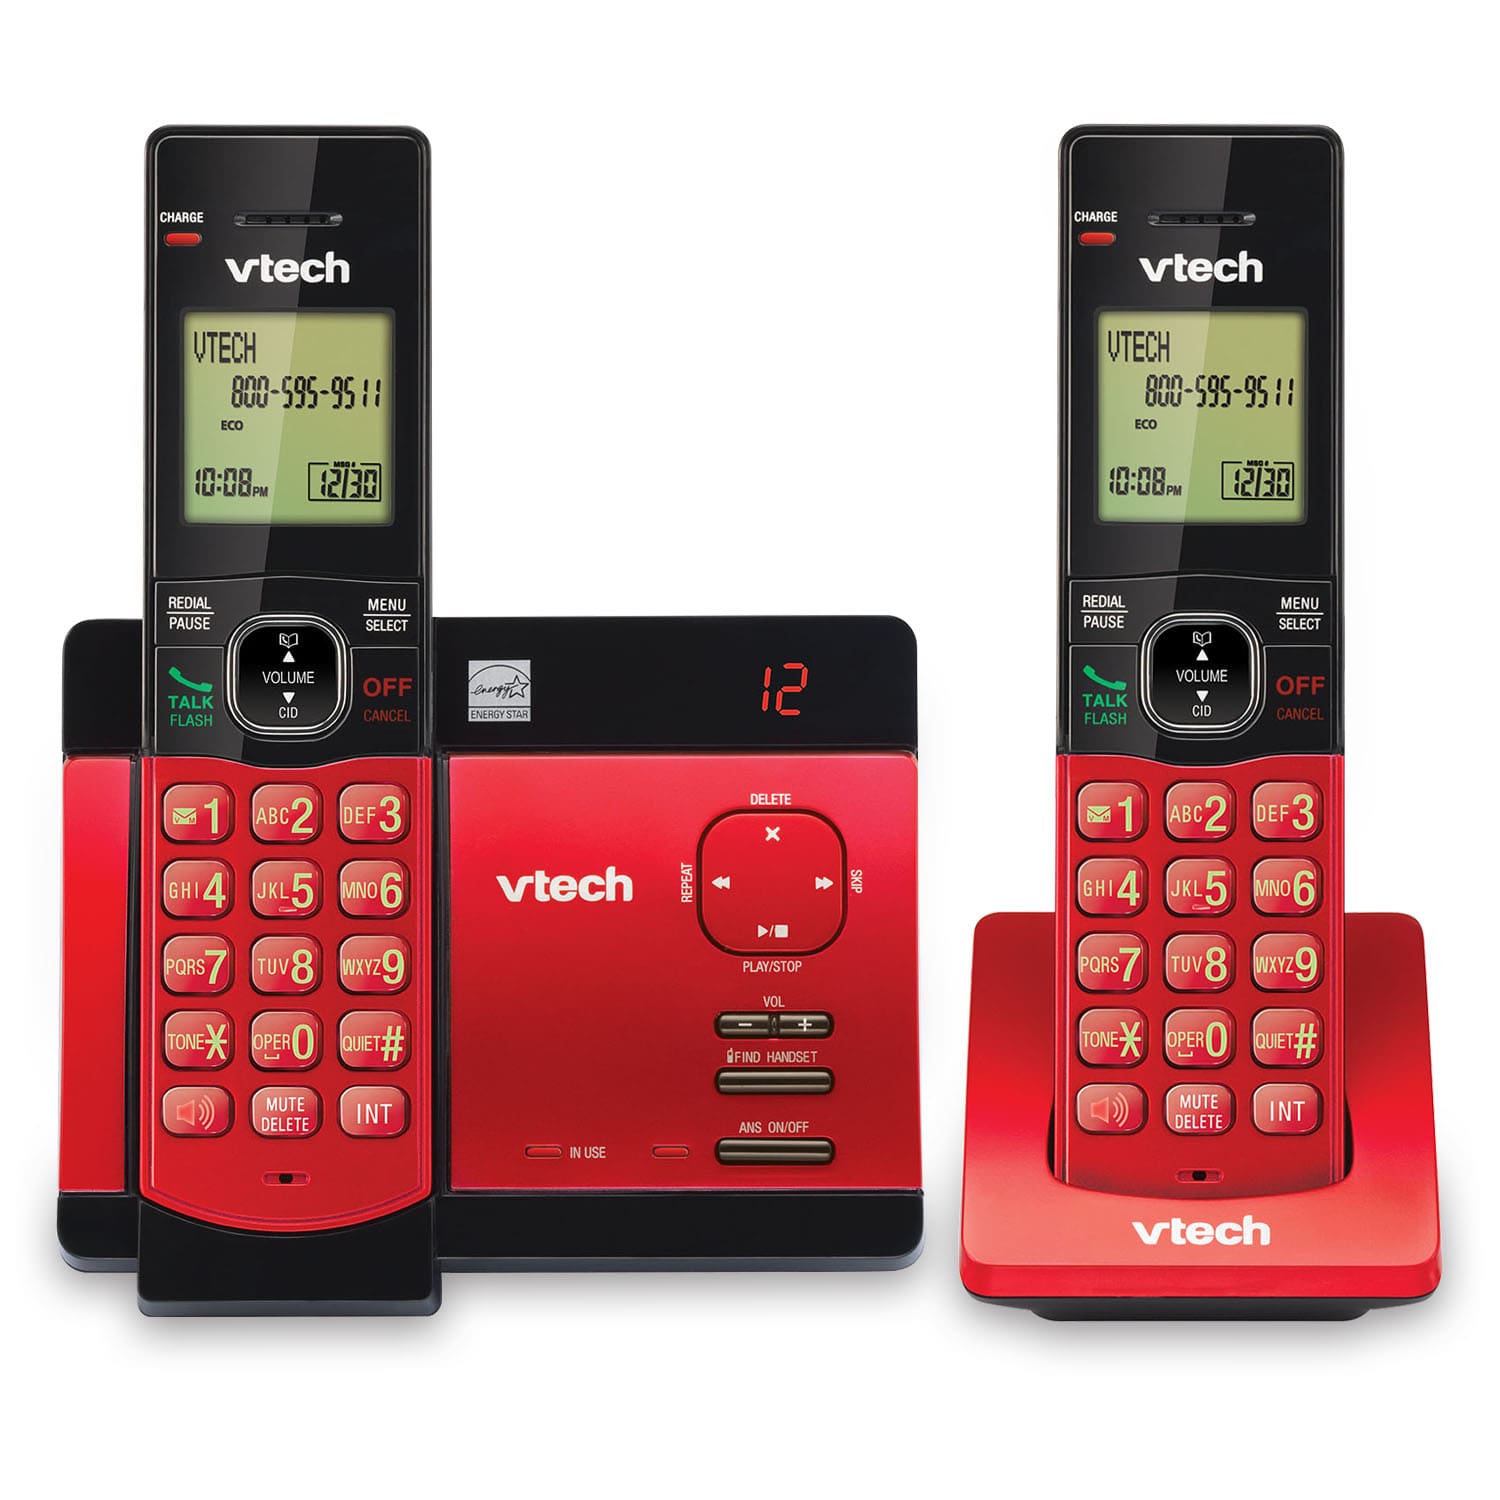 2 Handset Cordless Phone System With Caller Id Call Waiting Cs5129 26 Vtech Cordless Phones